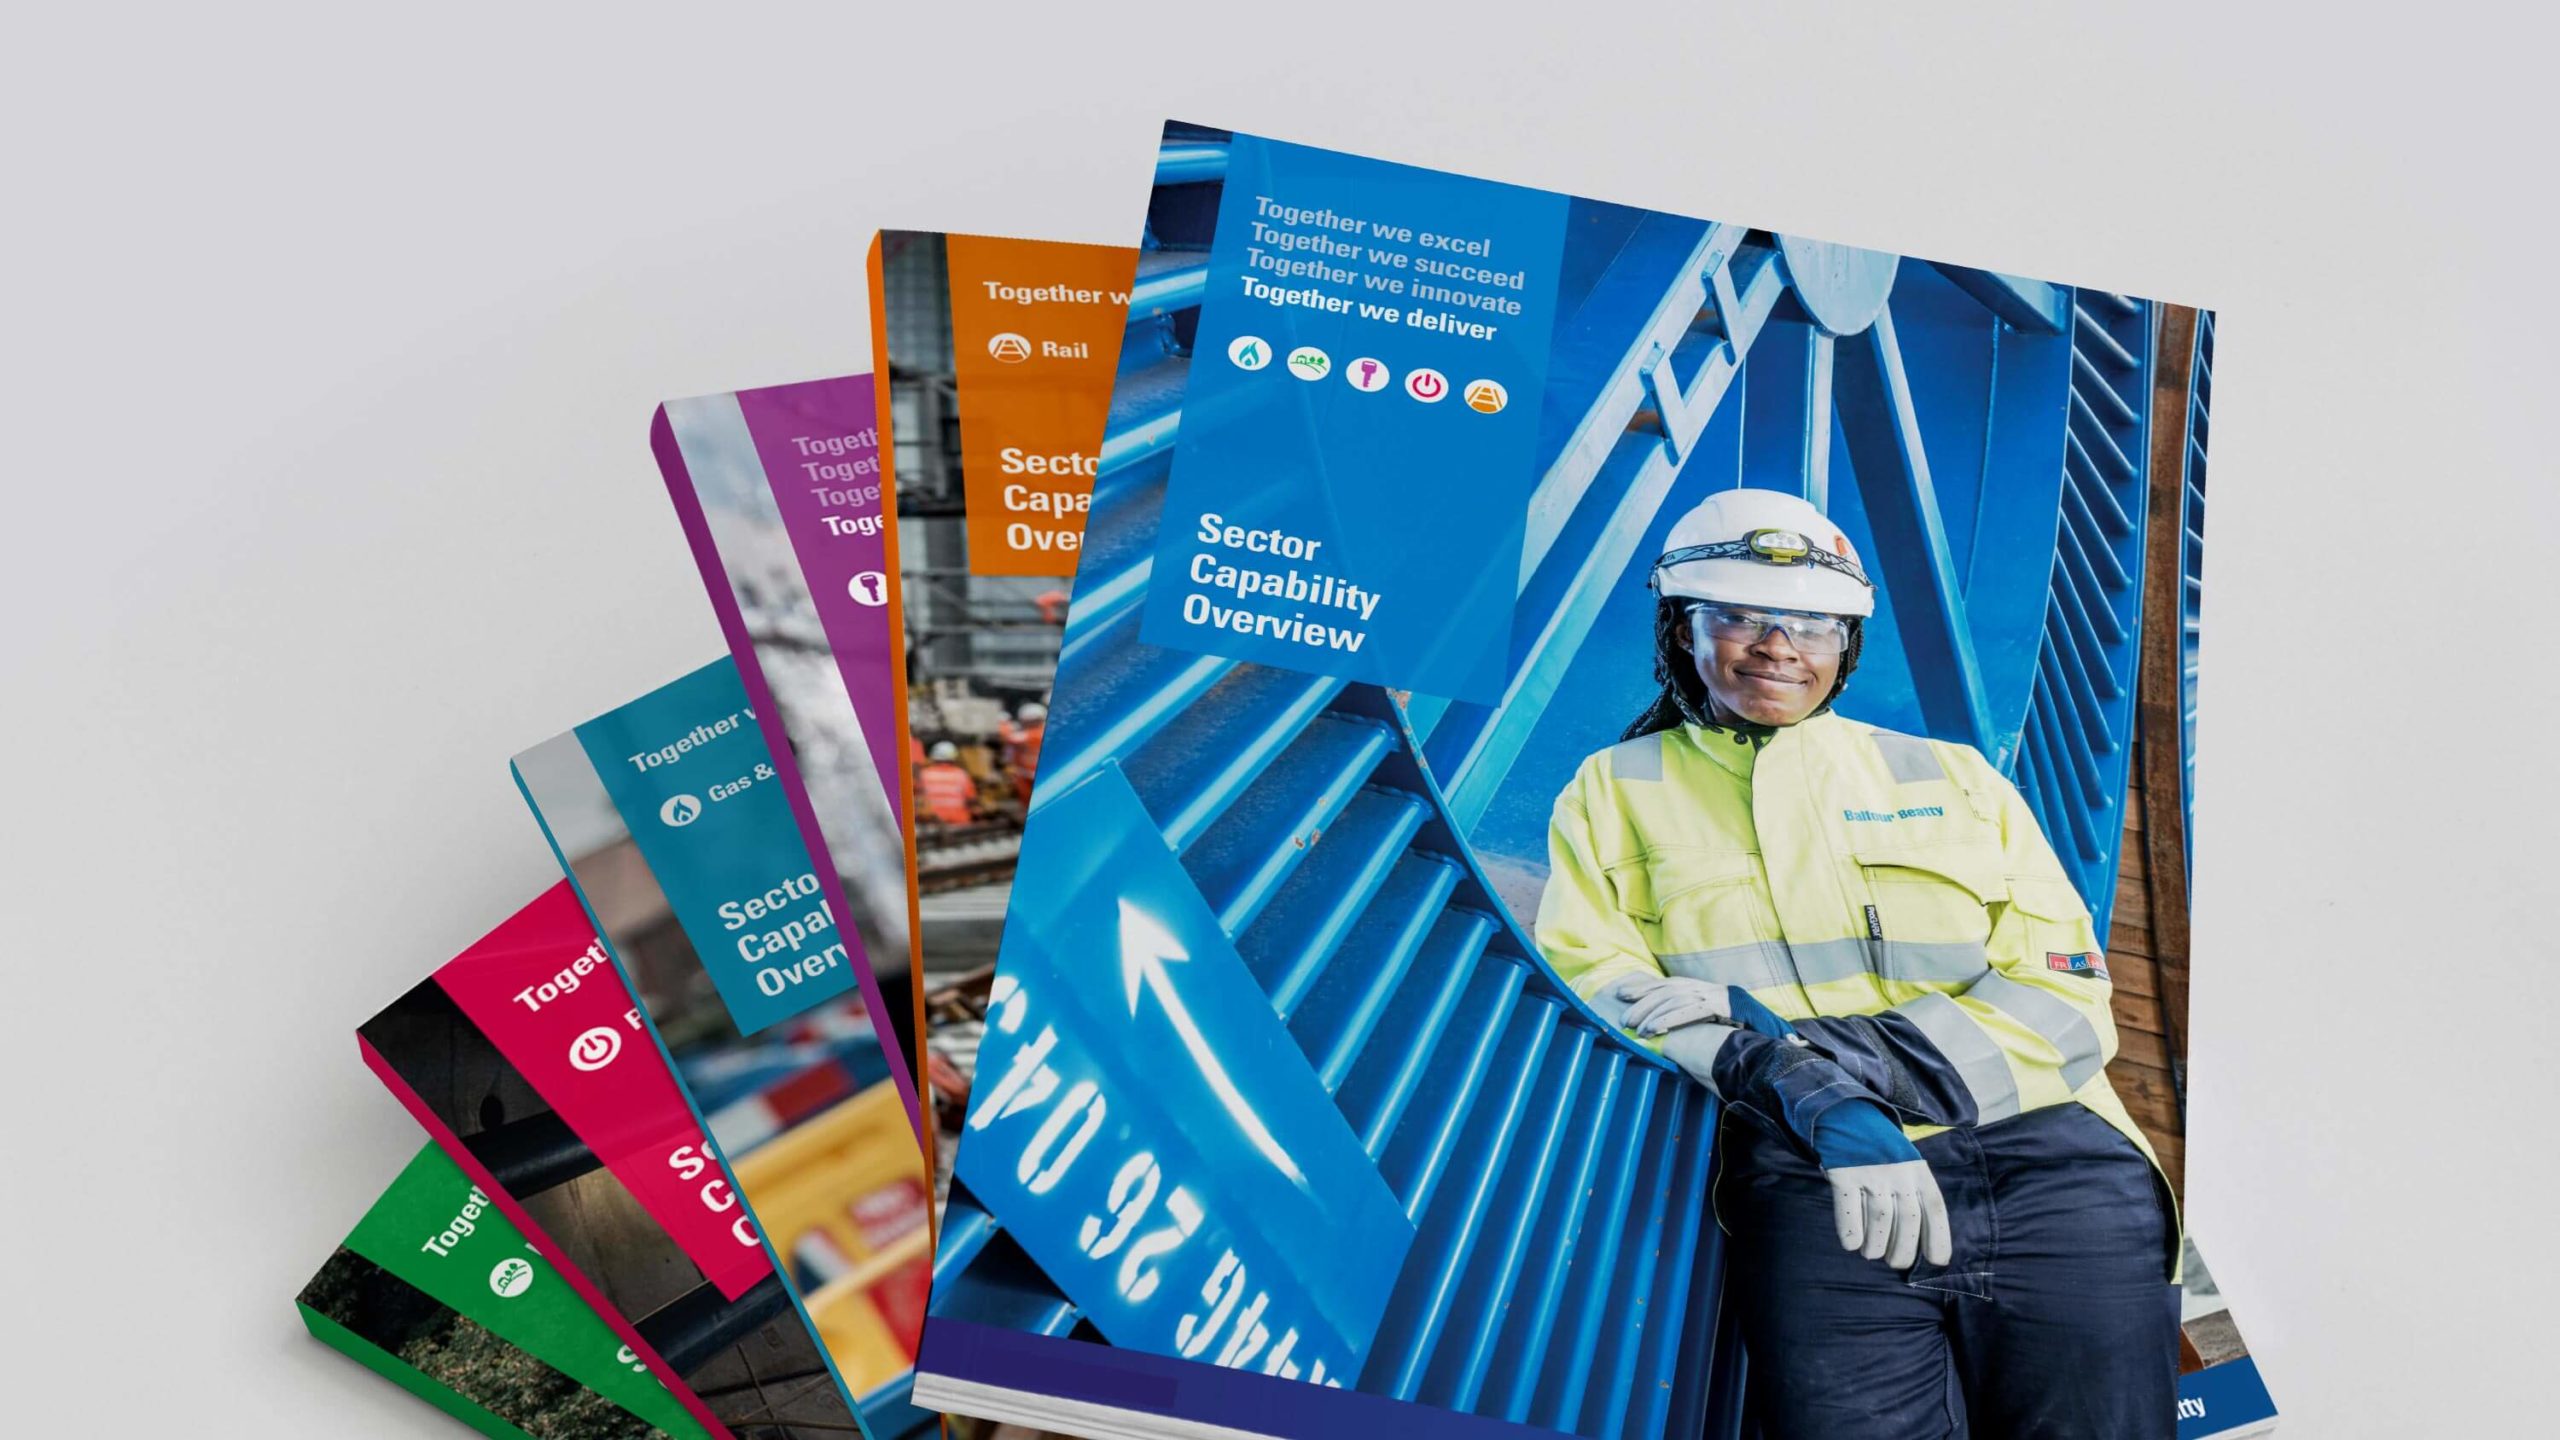 Balfour Beatty Services division brochures